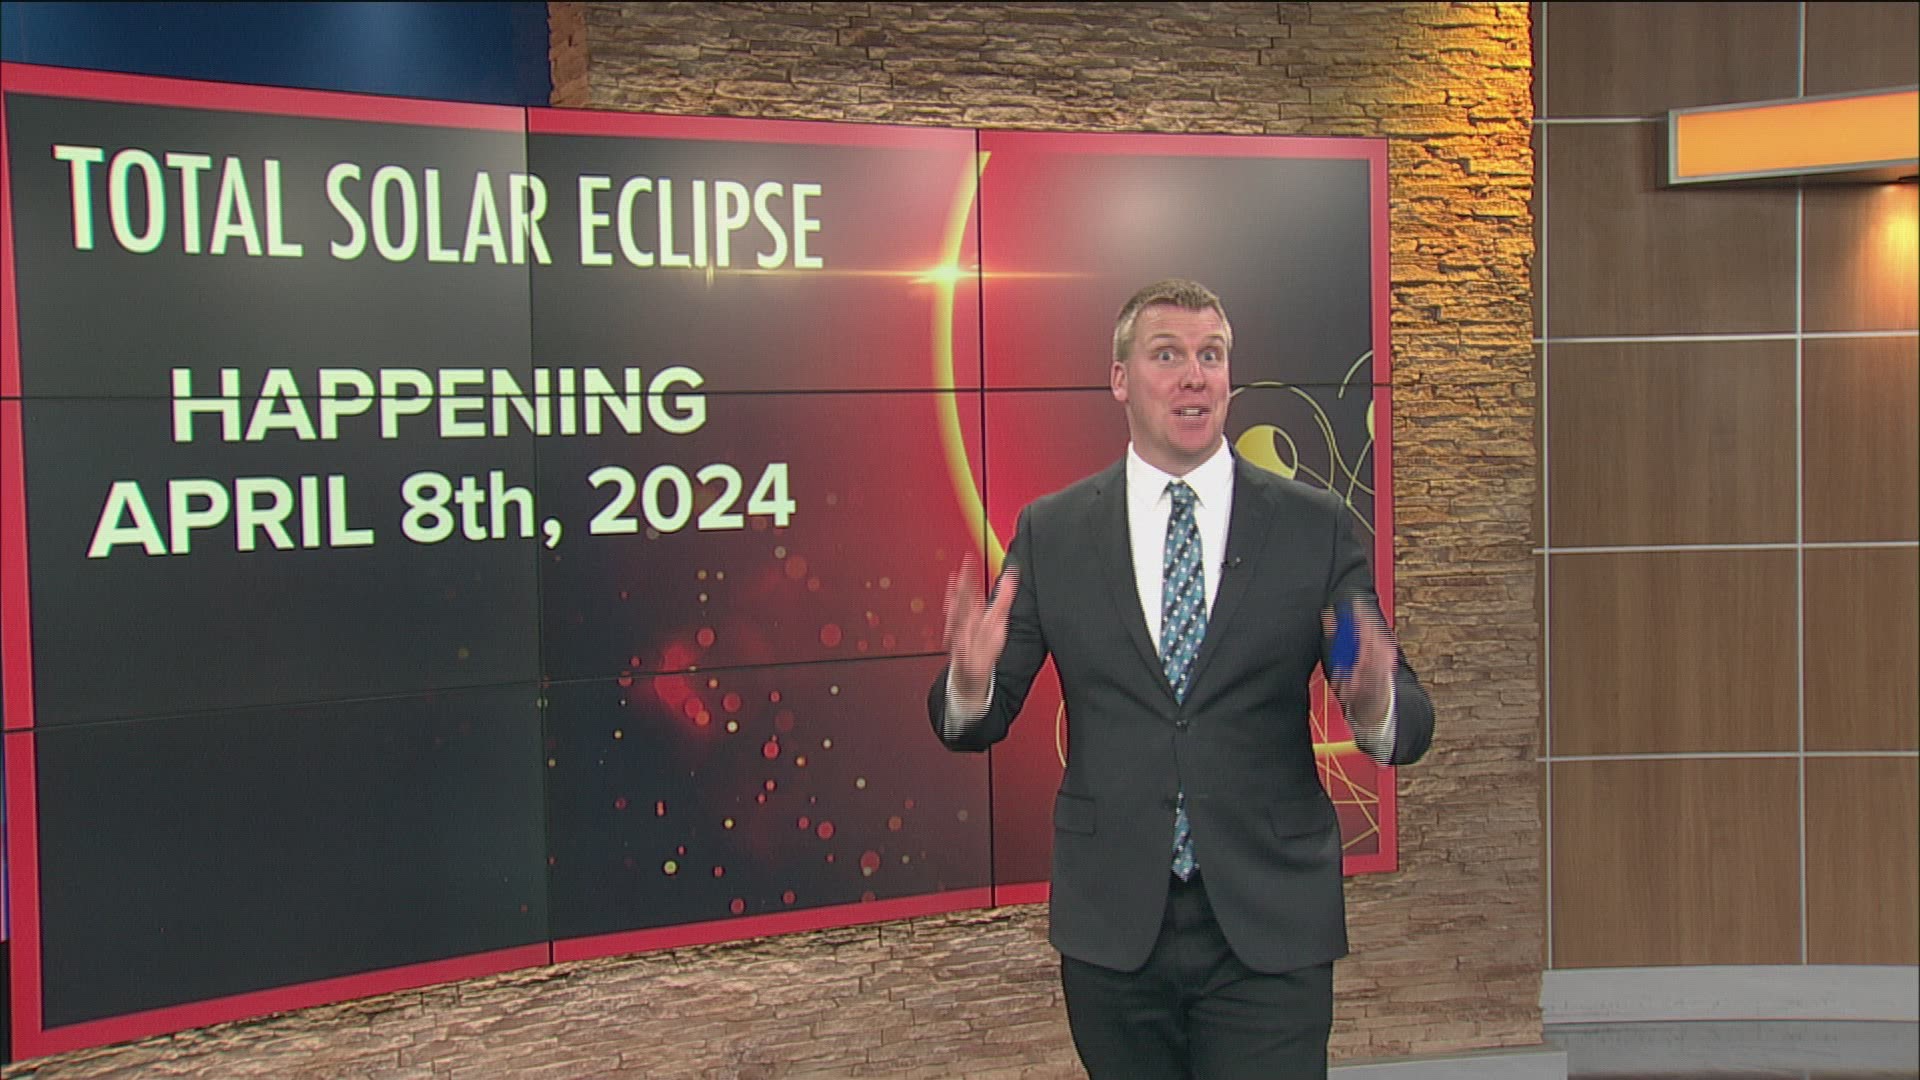 WTOL 11 Meteorologist Ryan Wichman breaks down the April 8, 2024 solar eclipse and how a previous eclipse played an important role in Ohio history.